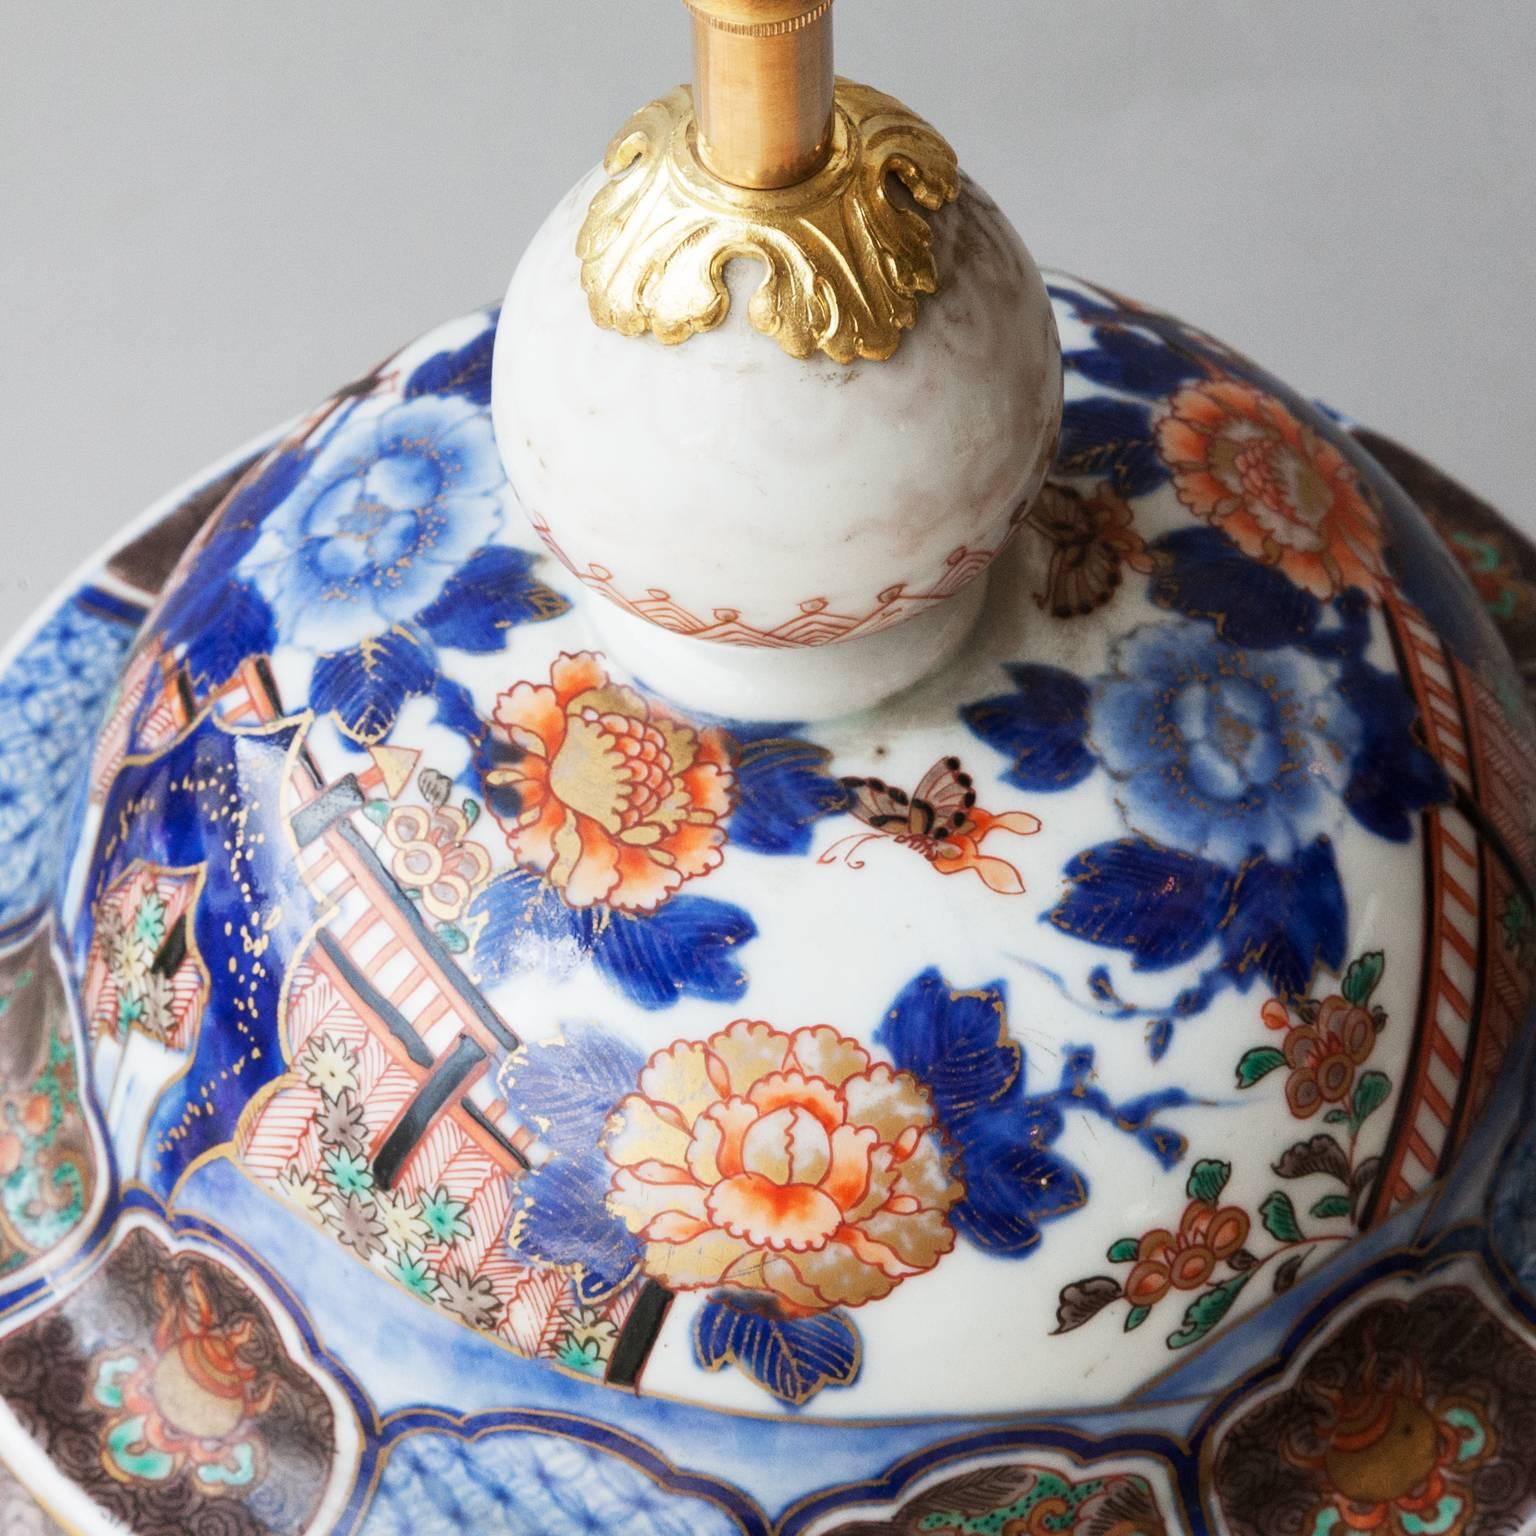 Japanese 19th Century Meiji Porcelain Vase With Gilt Bronze Mounts Converted to a Lamp For Sale